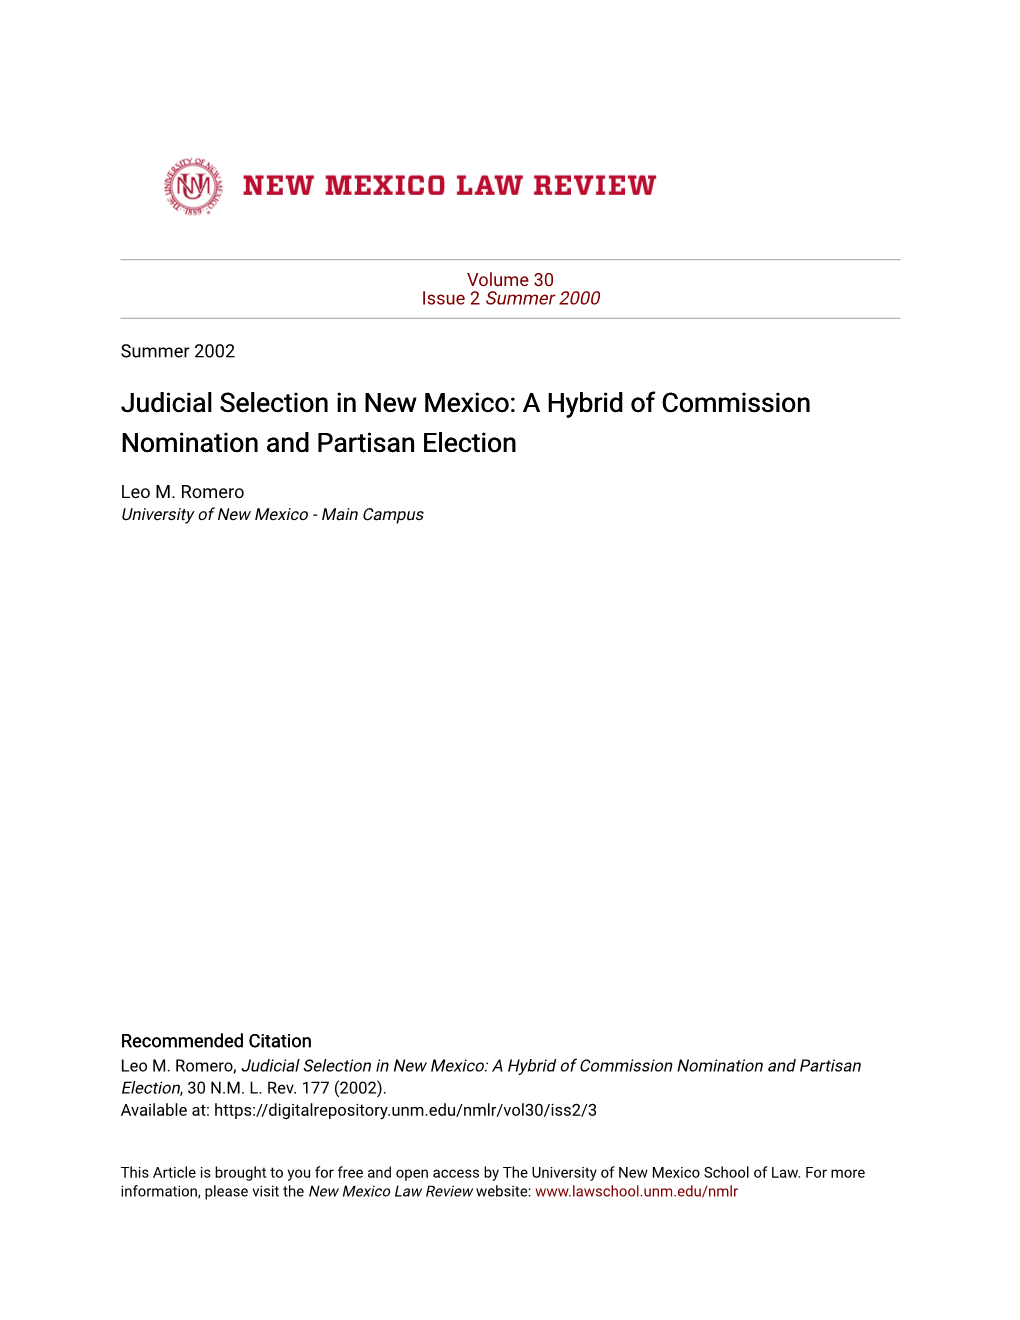 Judicial Selection in New Mexico: a Hybrid of Commission Nomination and Partisan Election